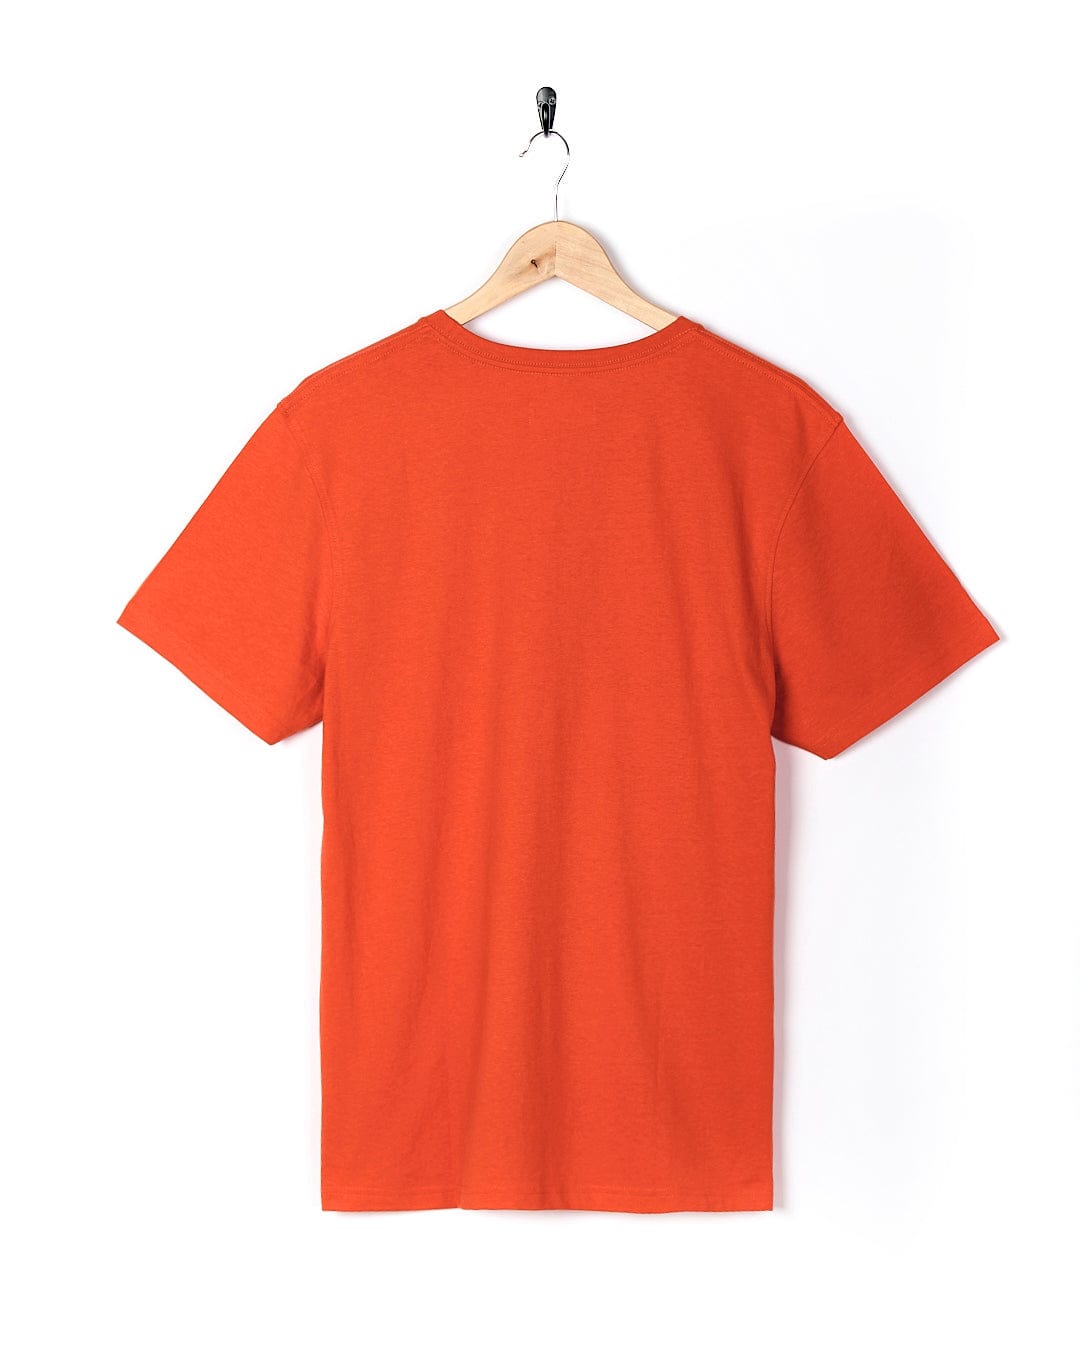 A Speed - Mens Short Sleeve T-Shirt - Red by Saltrock hanging on a hanger.